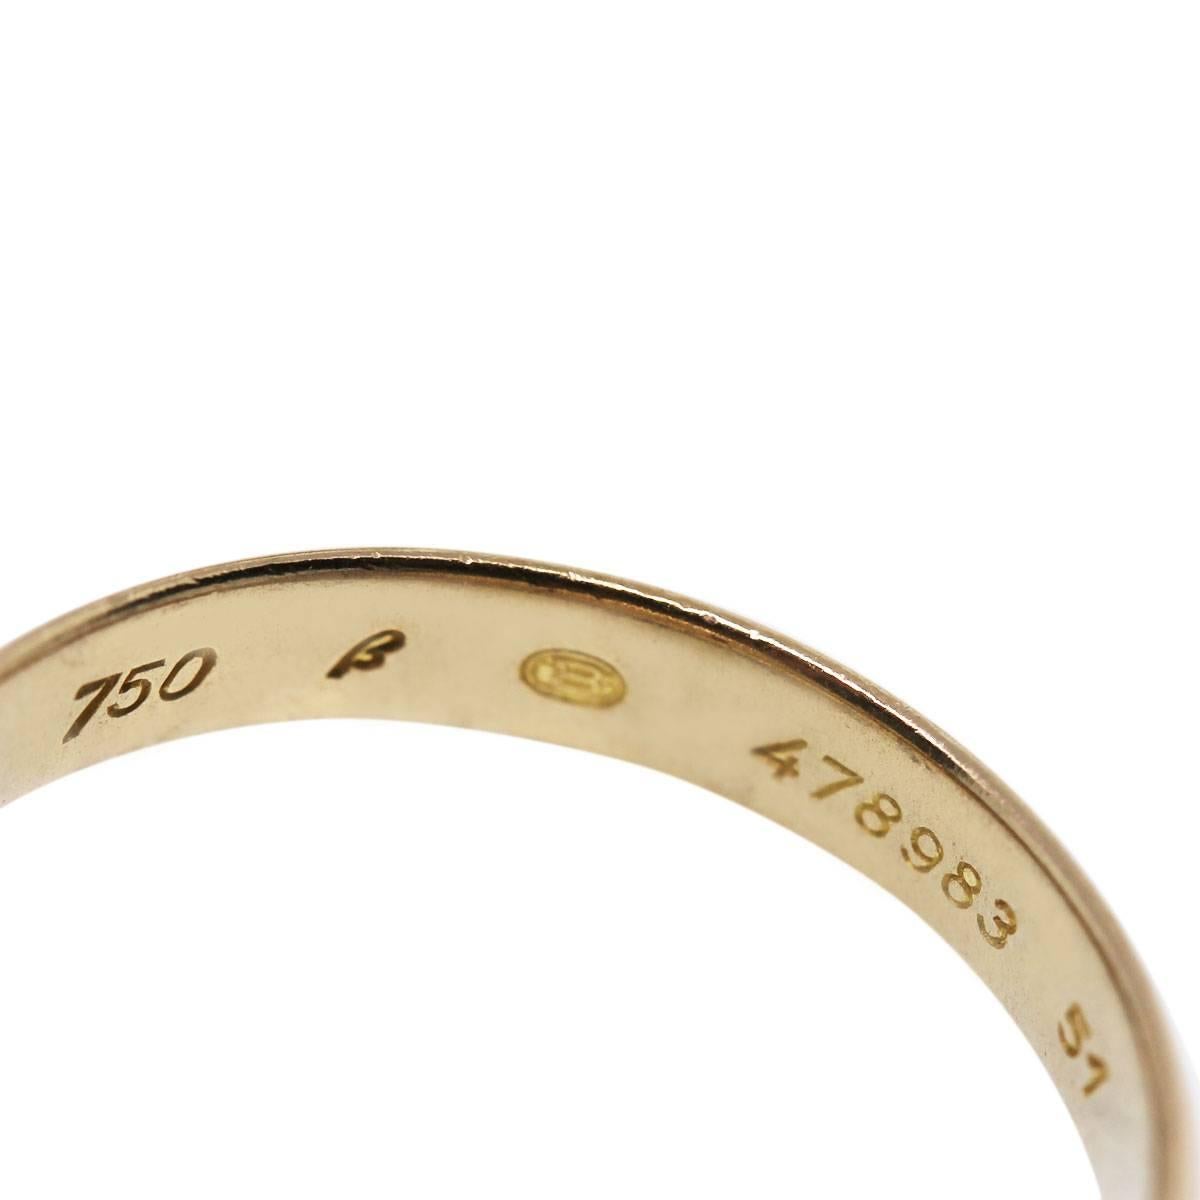 Brand	Cartier
Style	Trinity Rolling Ring
Weight	4.9dwt (7.6g)
Size	4.5; Cartier size 51
Material	18K White, Yellow, and Rose Gold
Current Retail	$1,250.00
Ring Measurements	Each band is approx. 0.13